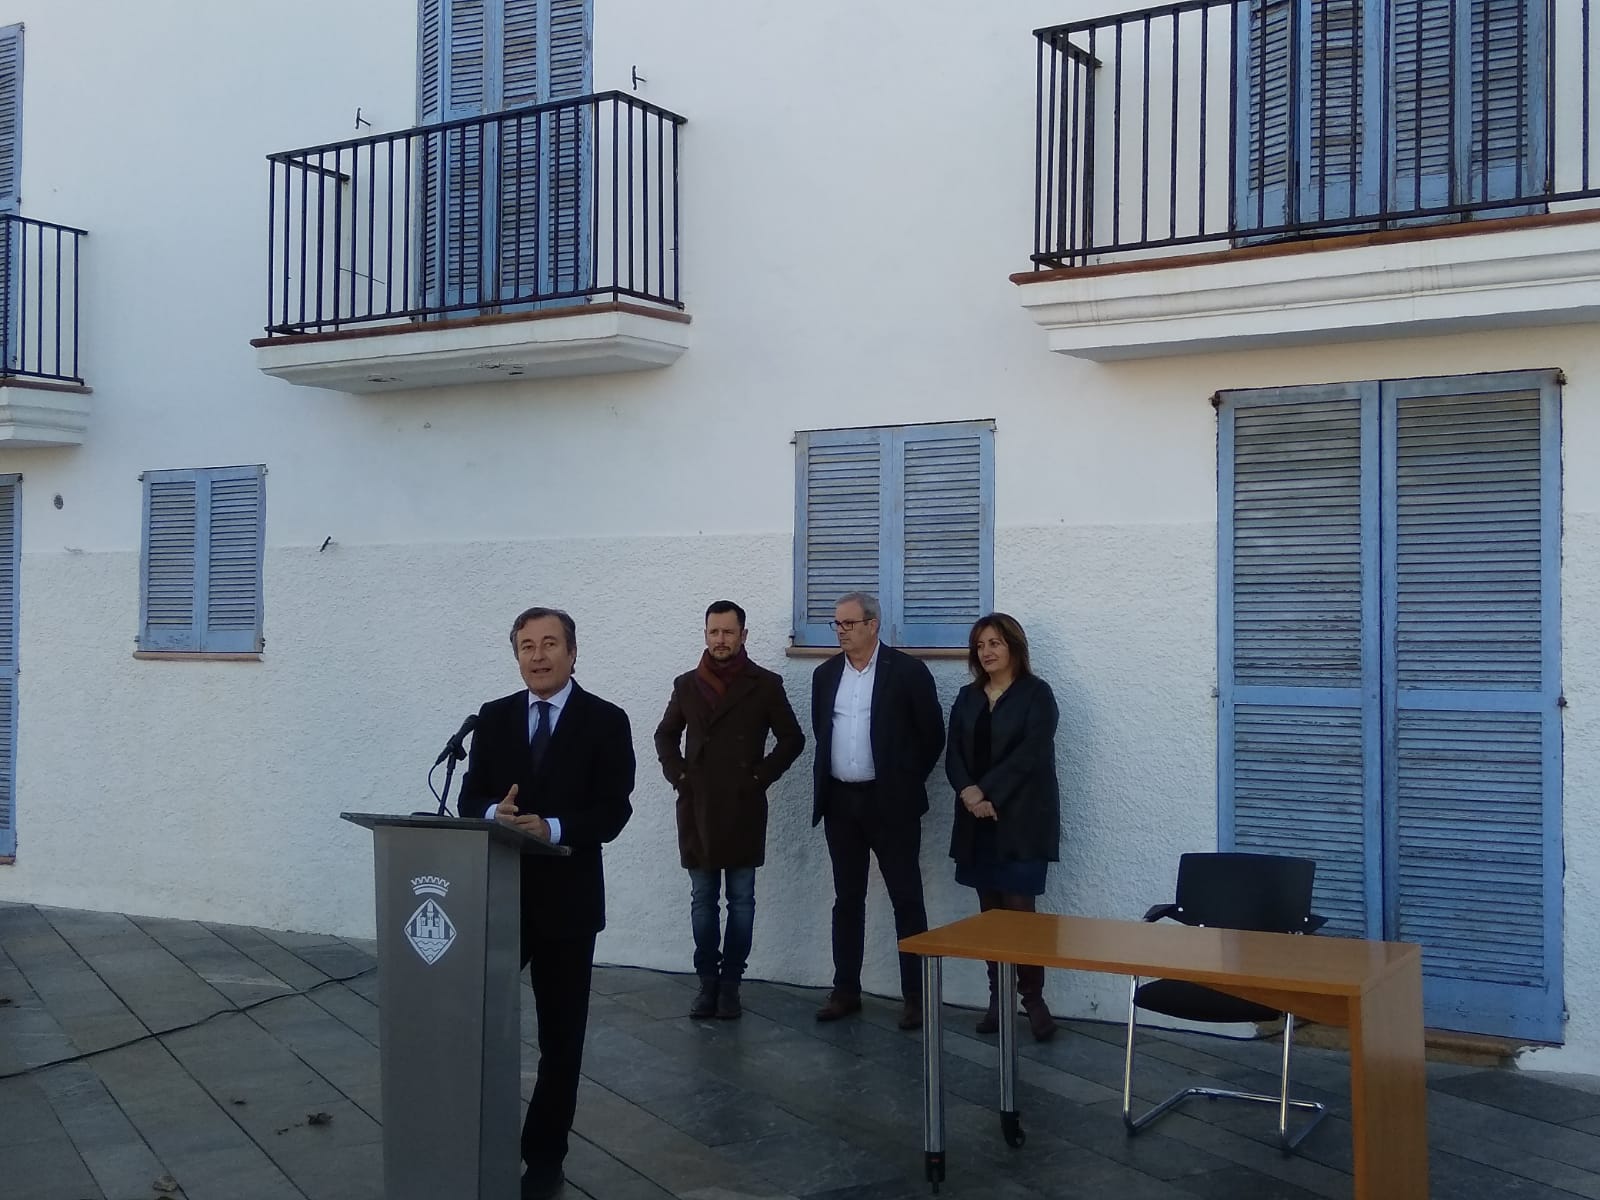 THE PORT AUTHORITY OF THE BALEARIC ISLANDS SIGNS THE PROTOCOL WITH THE REGIONAL GOVERNMENT, THE ISLAND COUNCIL AND THE TOWN COUNCIL OF IBIZA FOR THE CREATION OF THE SEA AND FISHING MUSEUM OF IBIZA